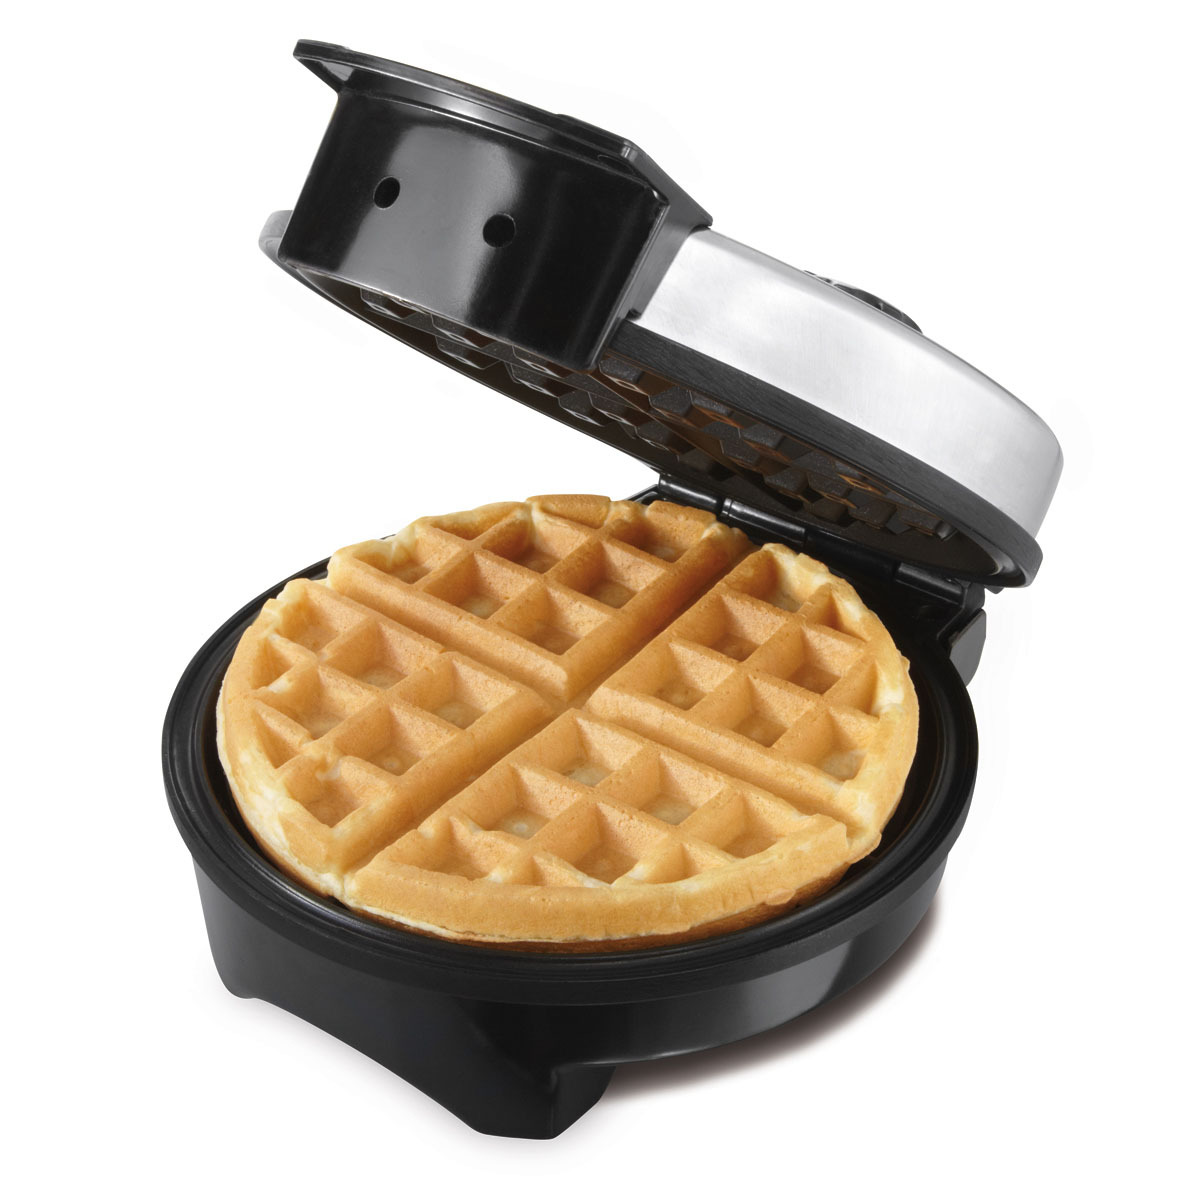 Oster 8" Nonstick Belgian Waffle Maker with Temperature Control, Silver - image 3 of 5